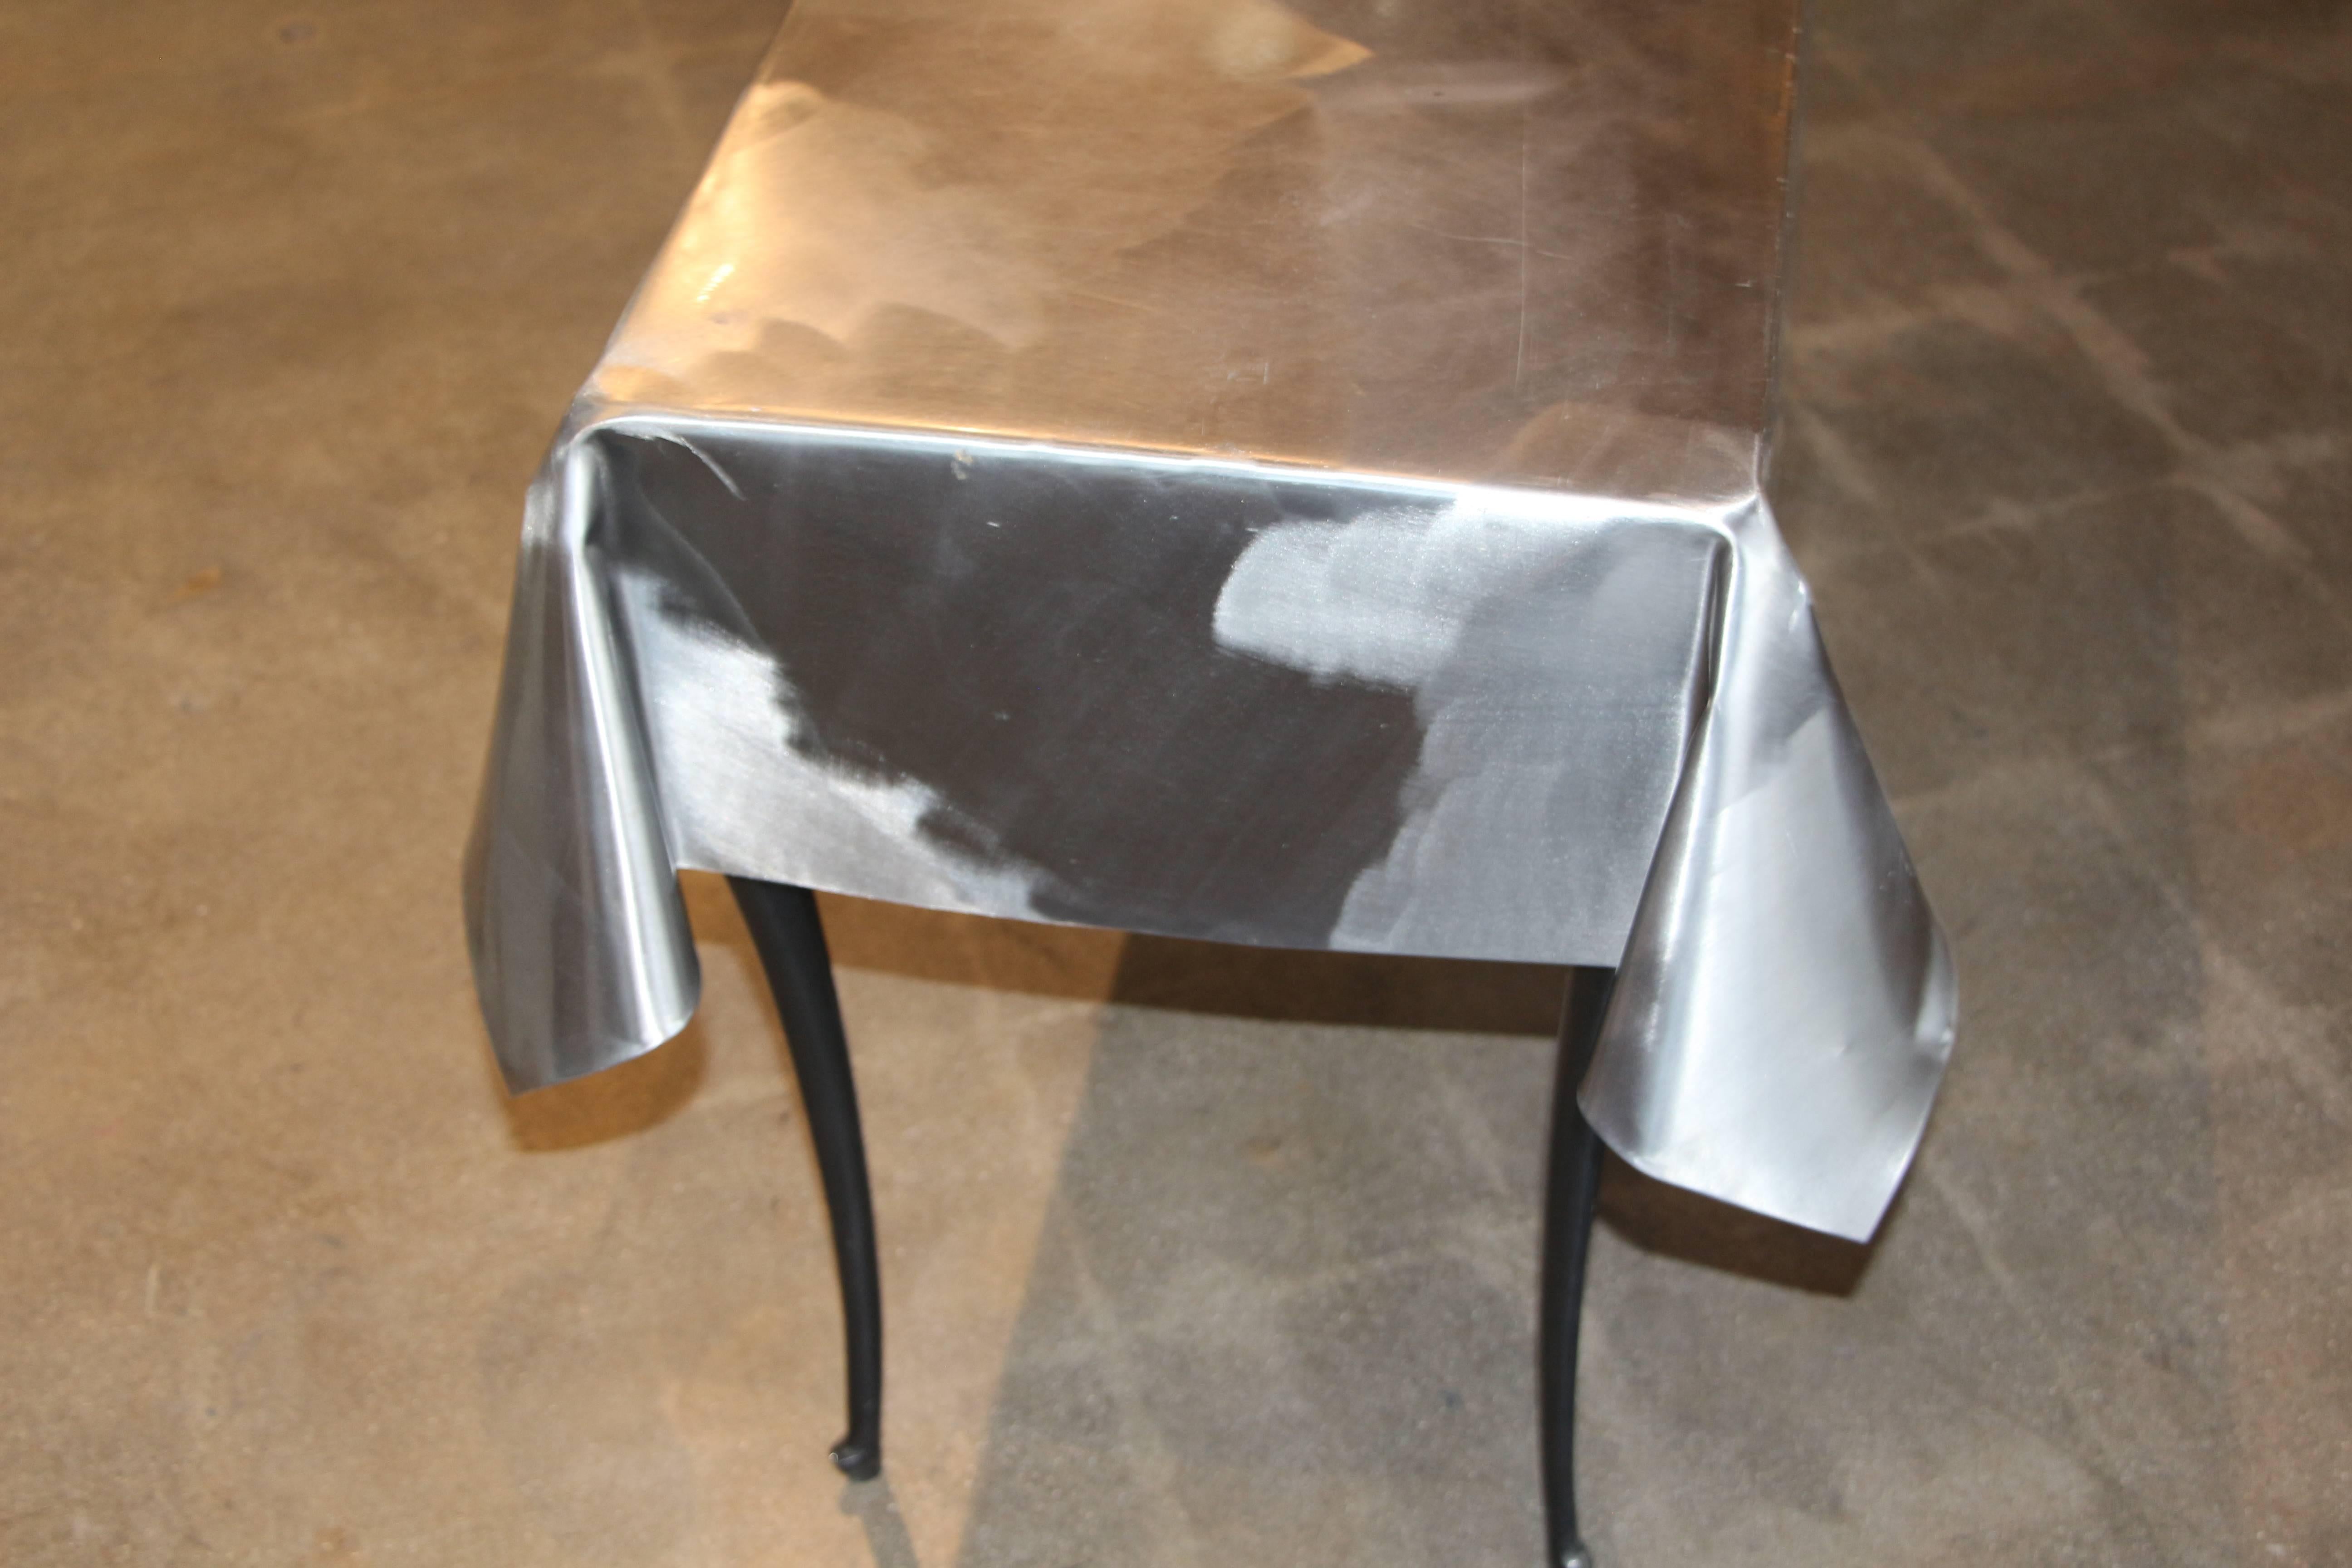 A most unusual metal draped console table with legs. A magnet sticks to the top so it may be some sort of steel. The magnet does not stick to the legs. Very nice finish to the tabletop. The base looks like this was not a production piece, more of a